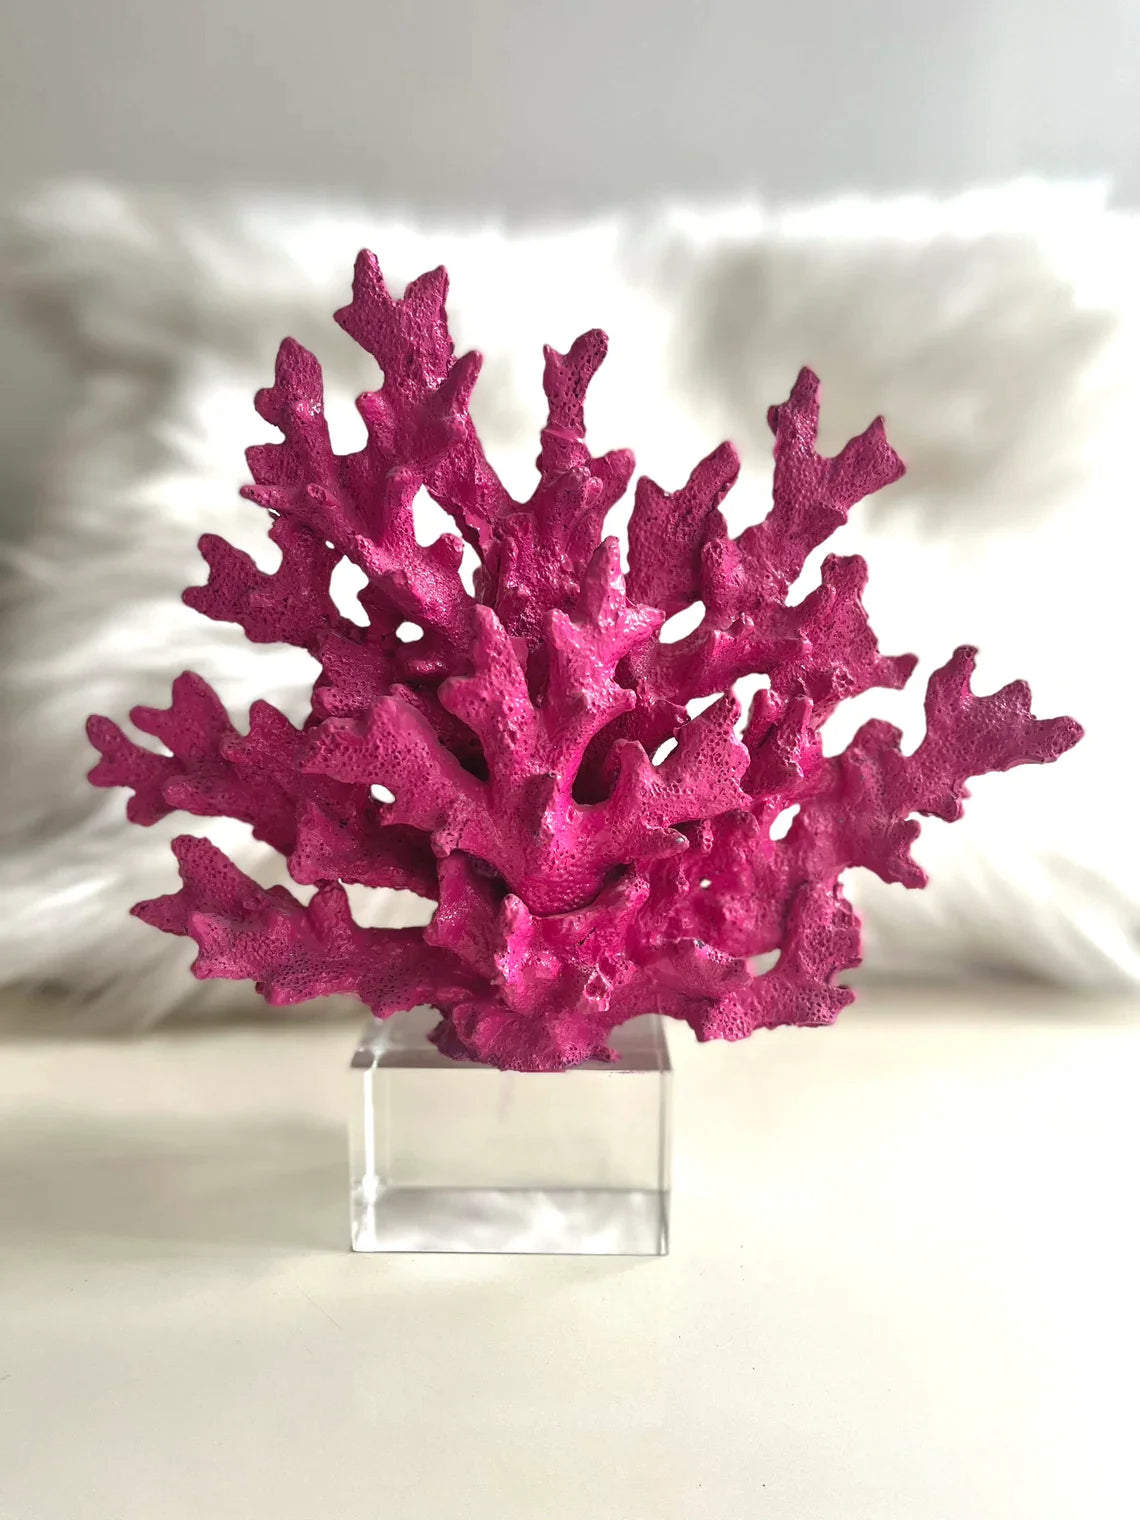 Gold Decorative Crystalline Coral Reef, Coral Decor, Coral Stone Sculpture, Luxury Home Decor Objects, Coral Stone Shelf Decor ,Crystal,Polyester,Classic Coral Objects, MLH001/1 MARBLEMAR